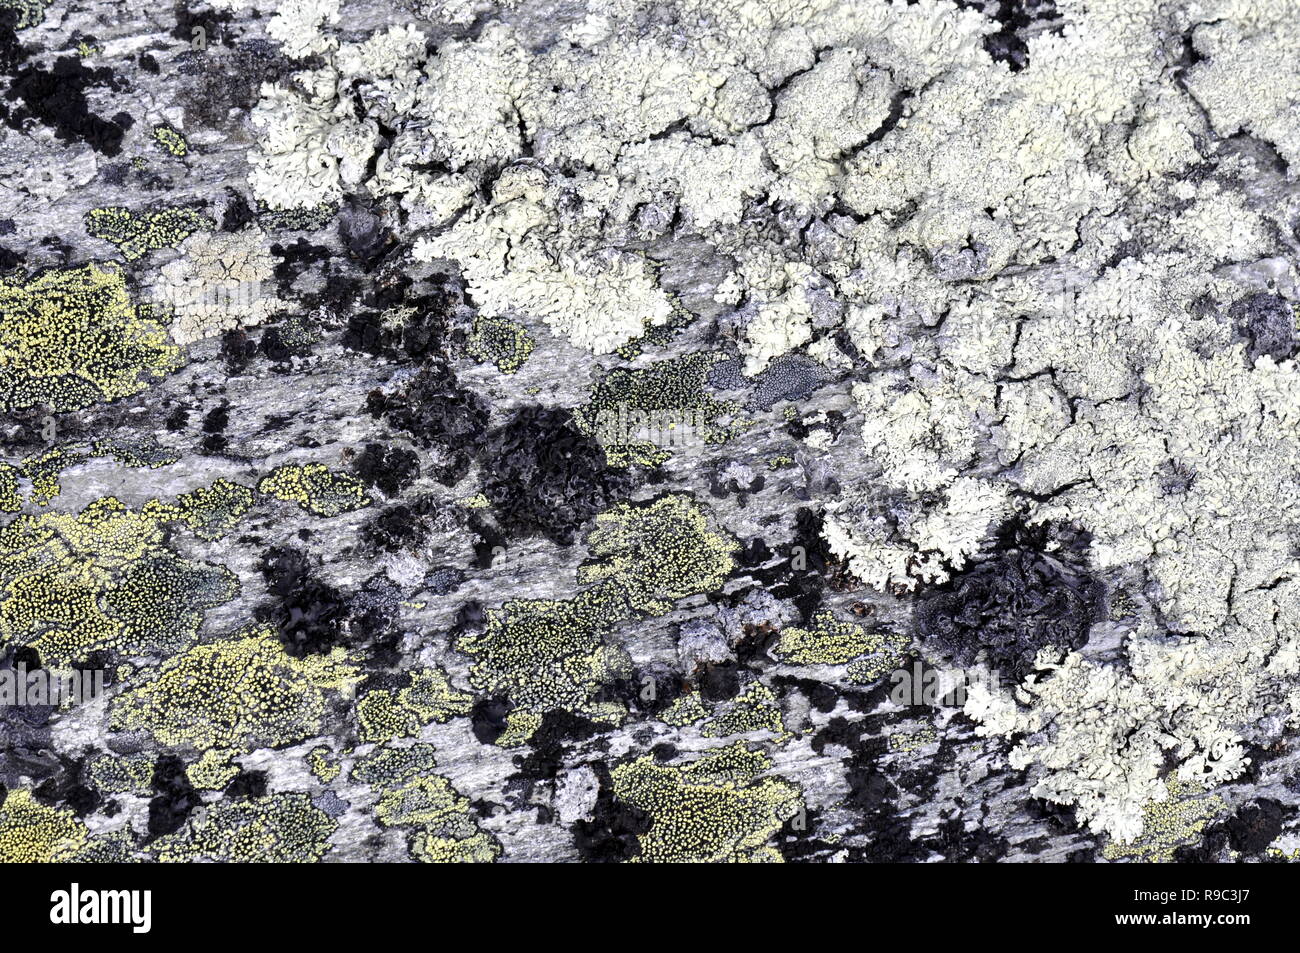 Different crustose lichen growing on a stone Stock Photo